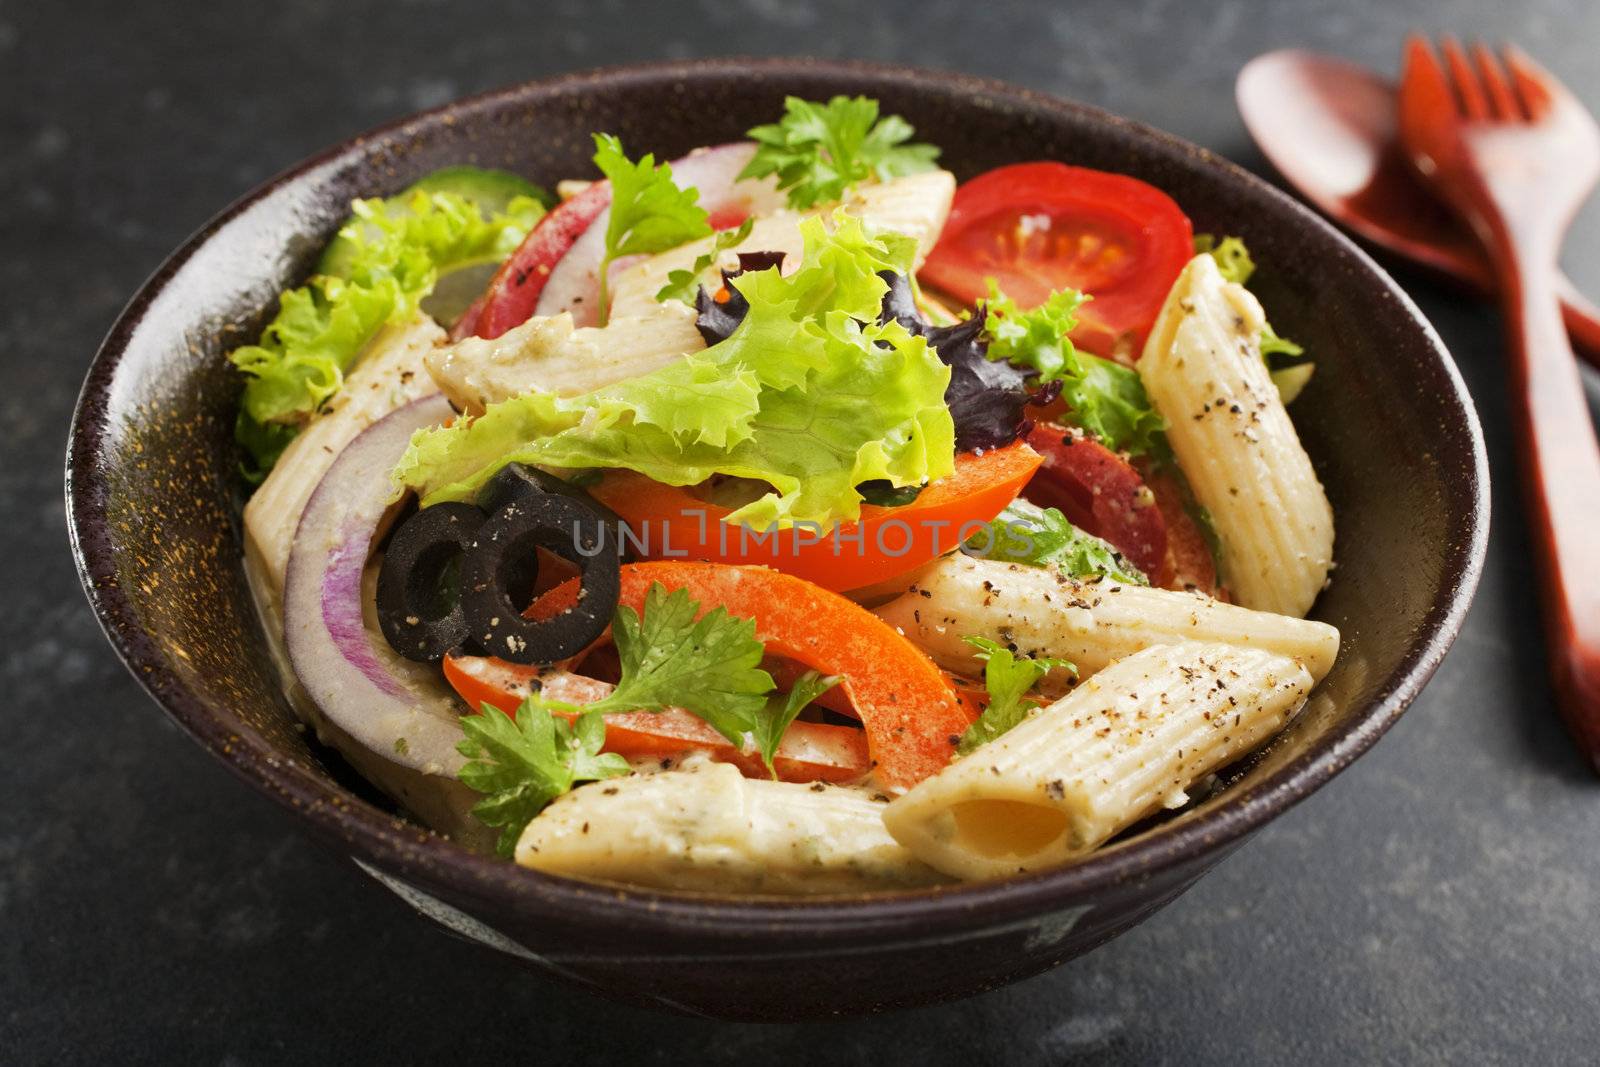 A bowl of pasta salad with a creamy pesto dressing. Salad includes red onions, curly lettuce, black olives, tomatoes,  bell peppers.